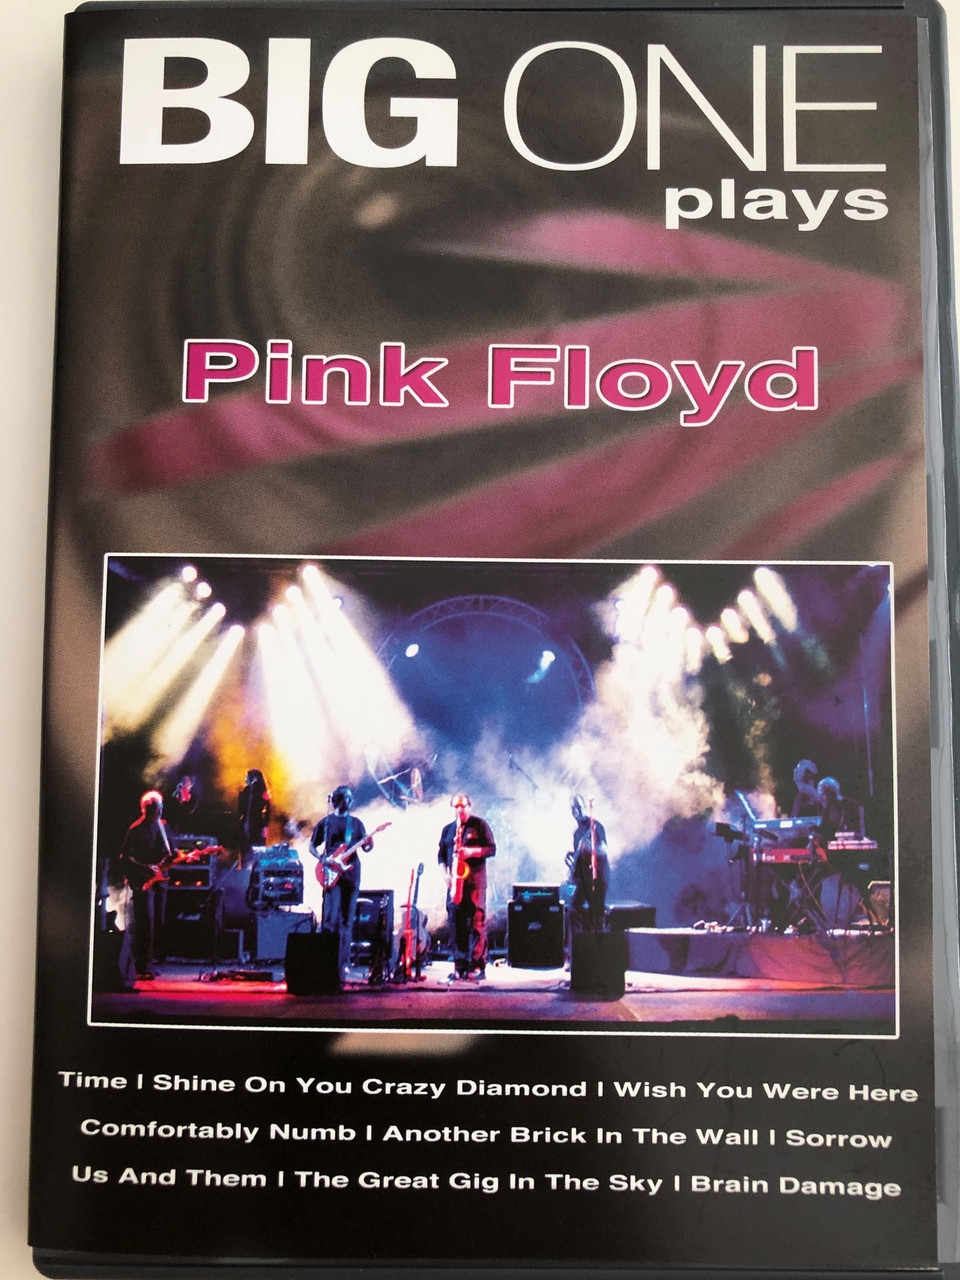 here,　Wish　one　Pink　wall　My　were　Numb,　Big　DVD　in　2009　brick　Bible　Live　the　Floyd　Tour　you　in　Another　Comfortably　on　plays　Language